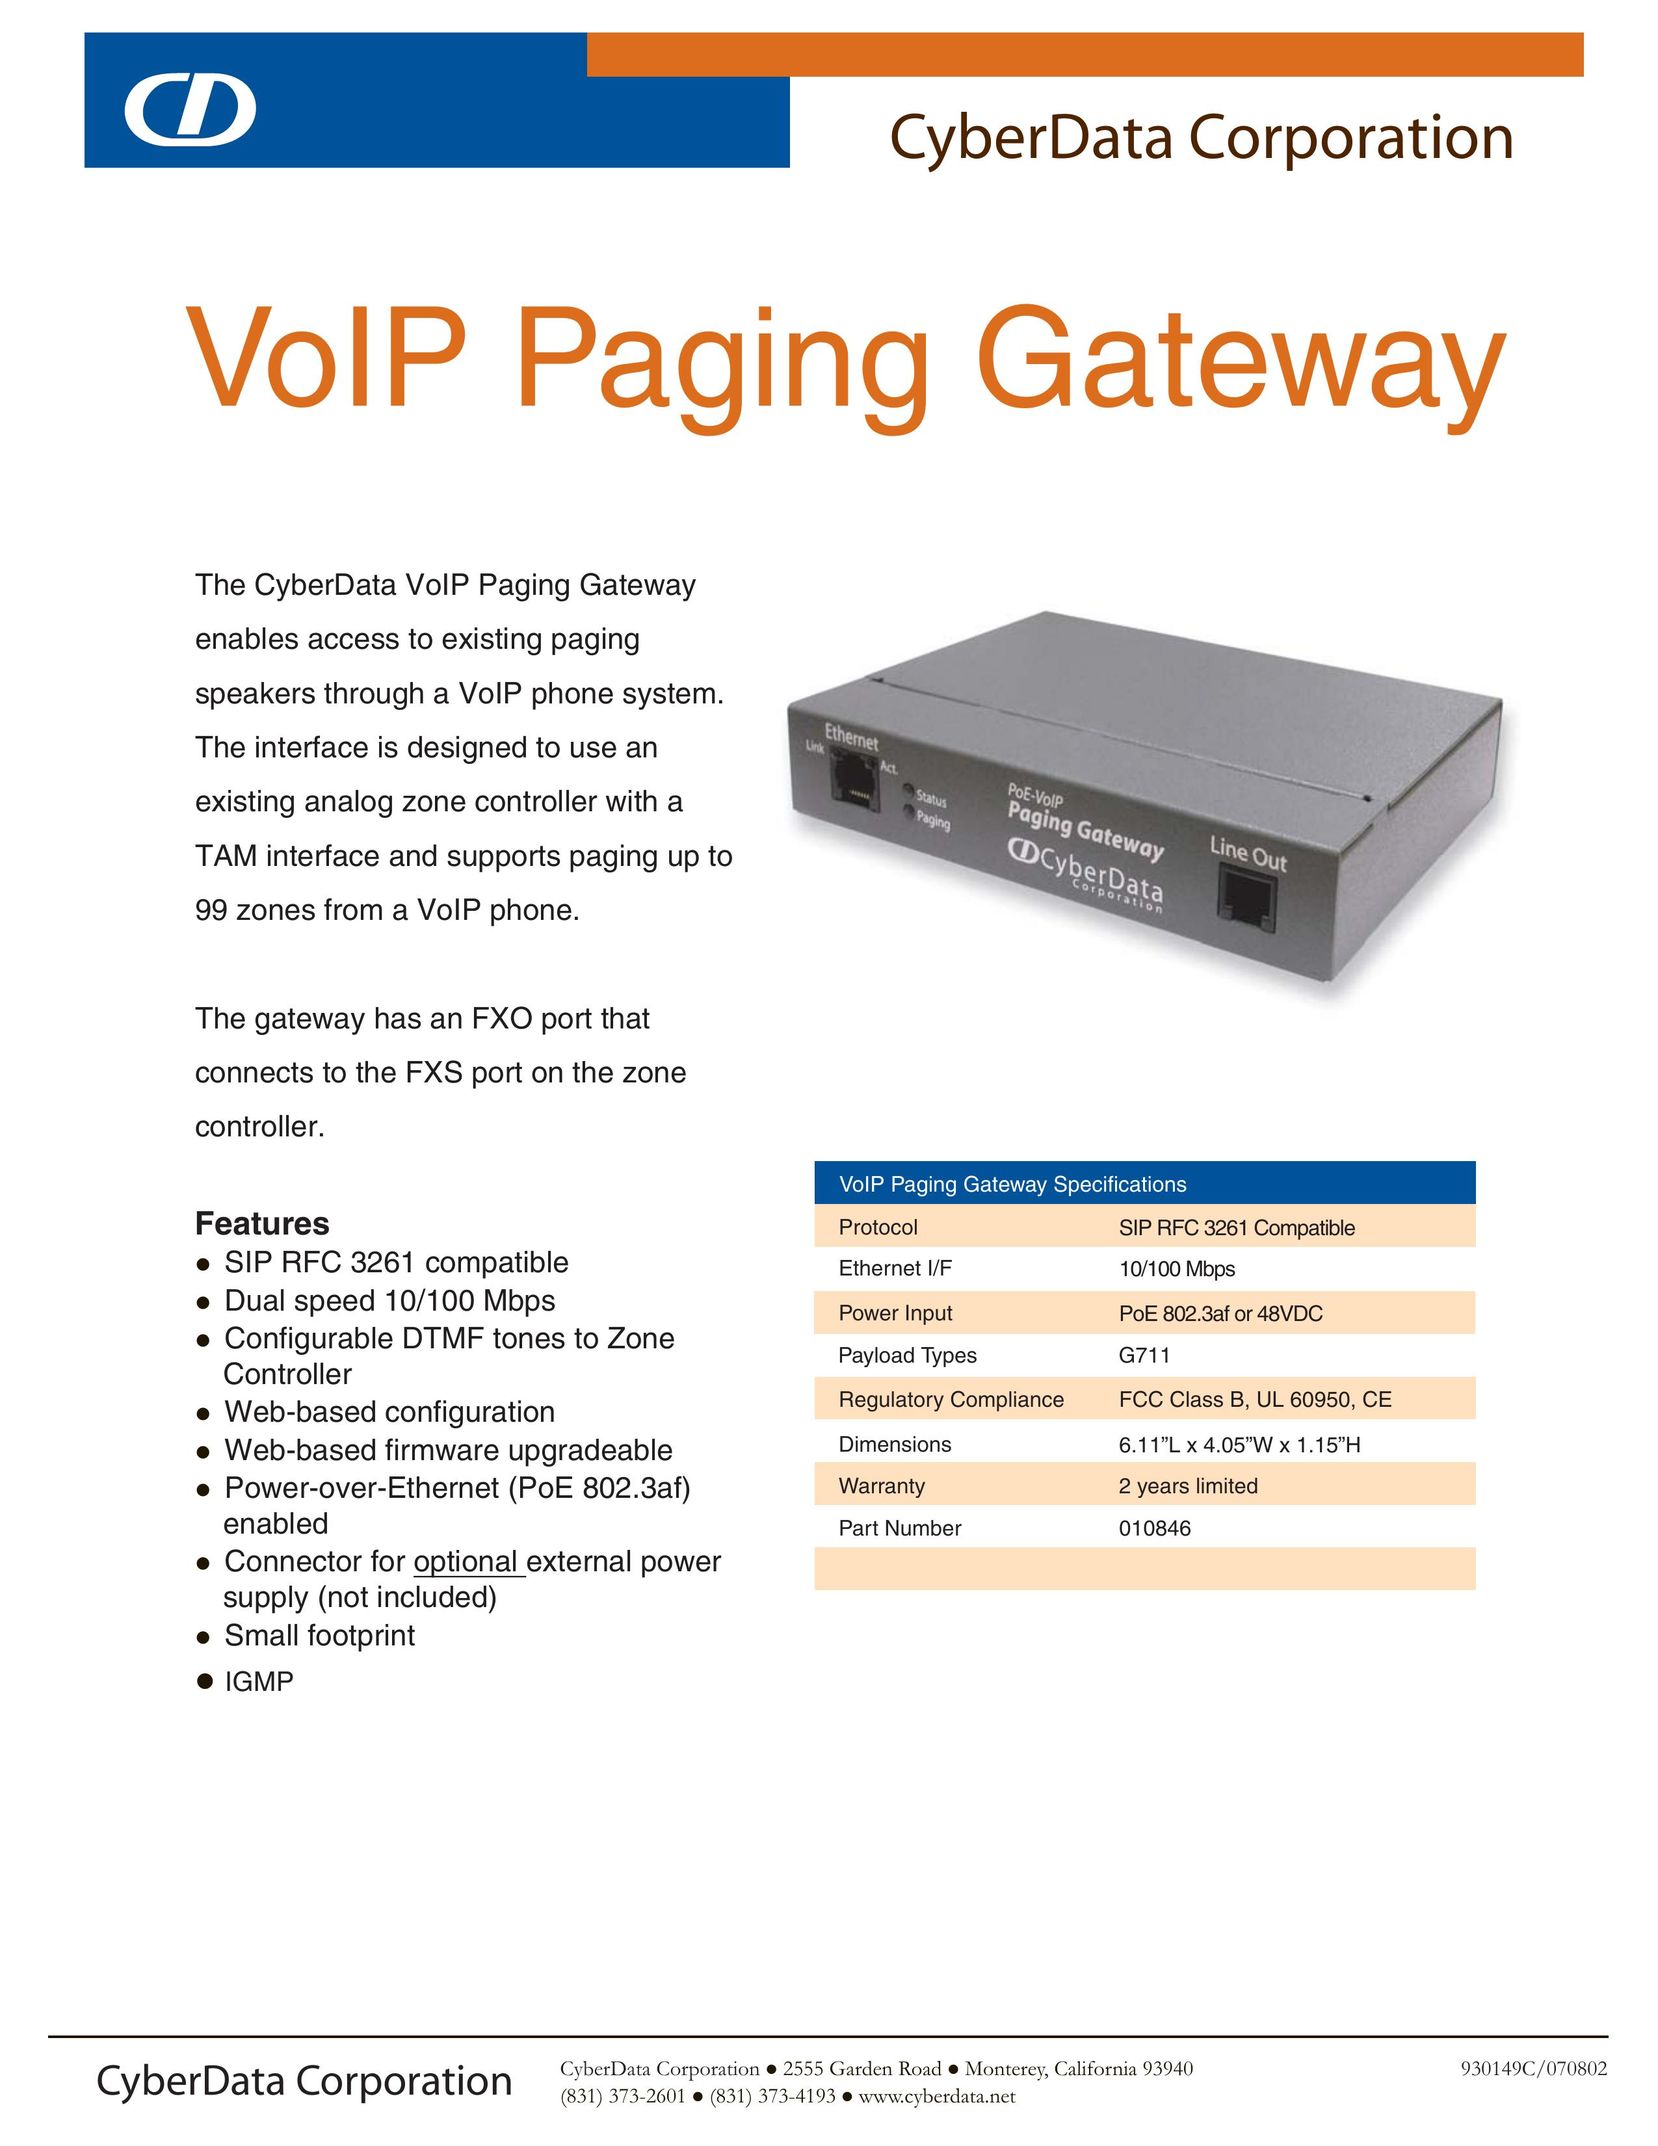 CyberData VoIP Paging Gateway Network Router User Manual